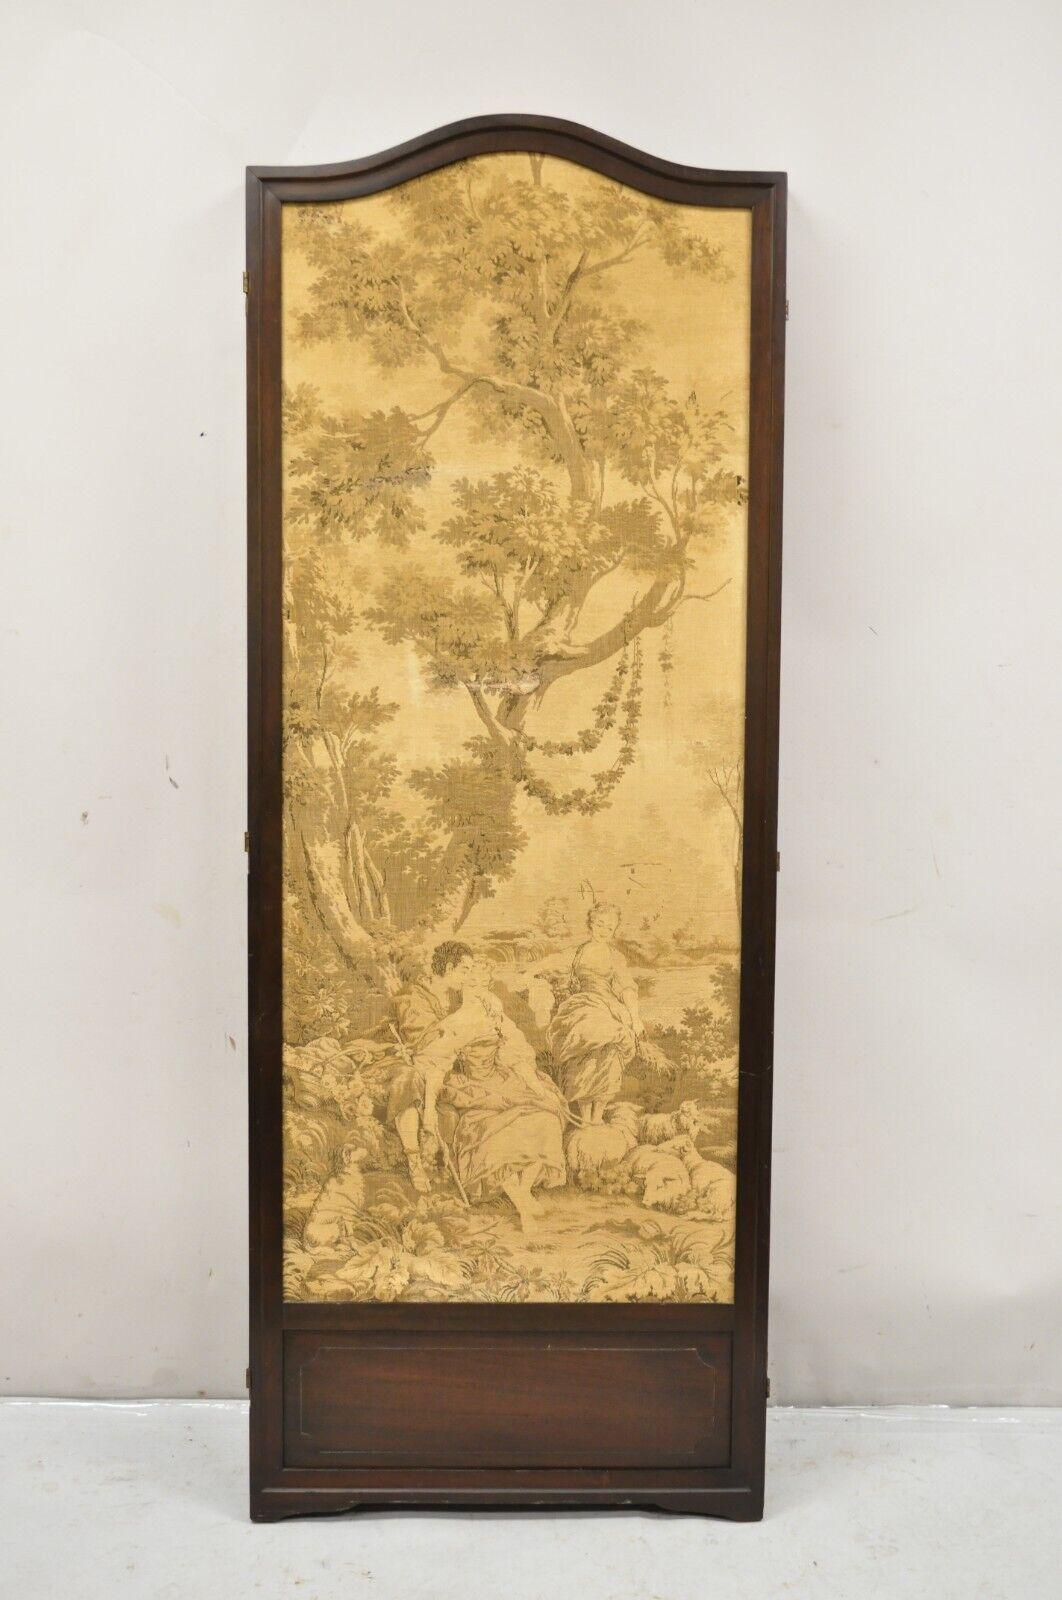 Antique Victorian French Tapestry Mahogany Frame 3 Panel Screen Room Divider. Item features figural tapestry with courting scenes, solid mahogany wood frames, very nice antique item. Circa Early 20th Century.
Measurements: 
68.5